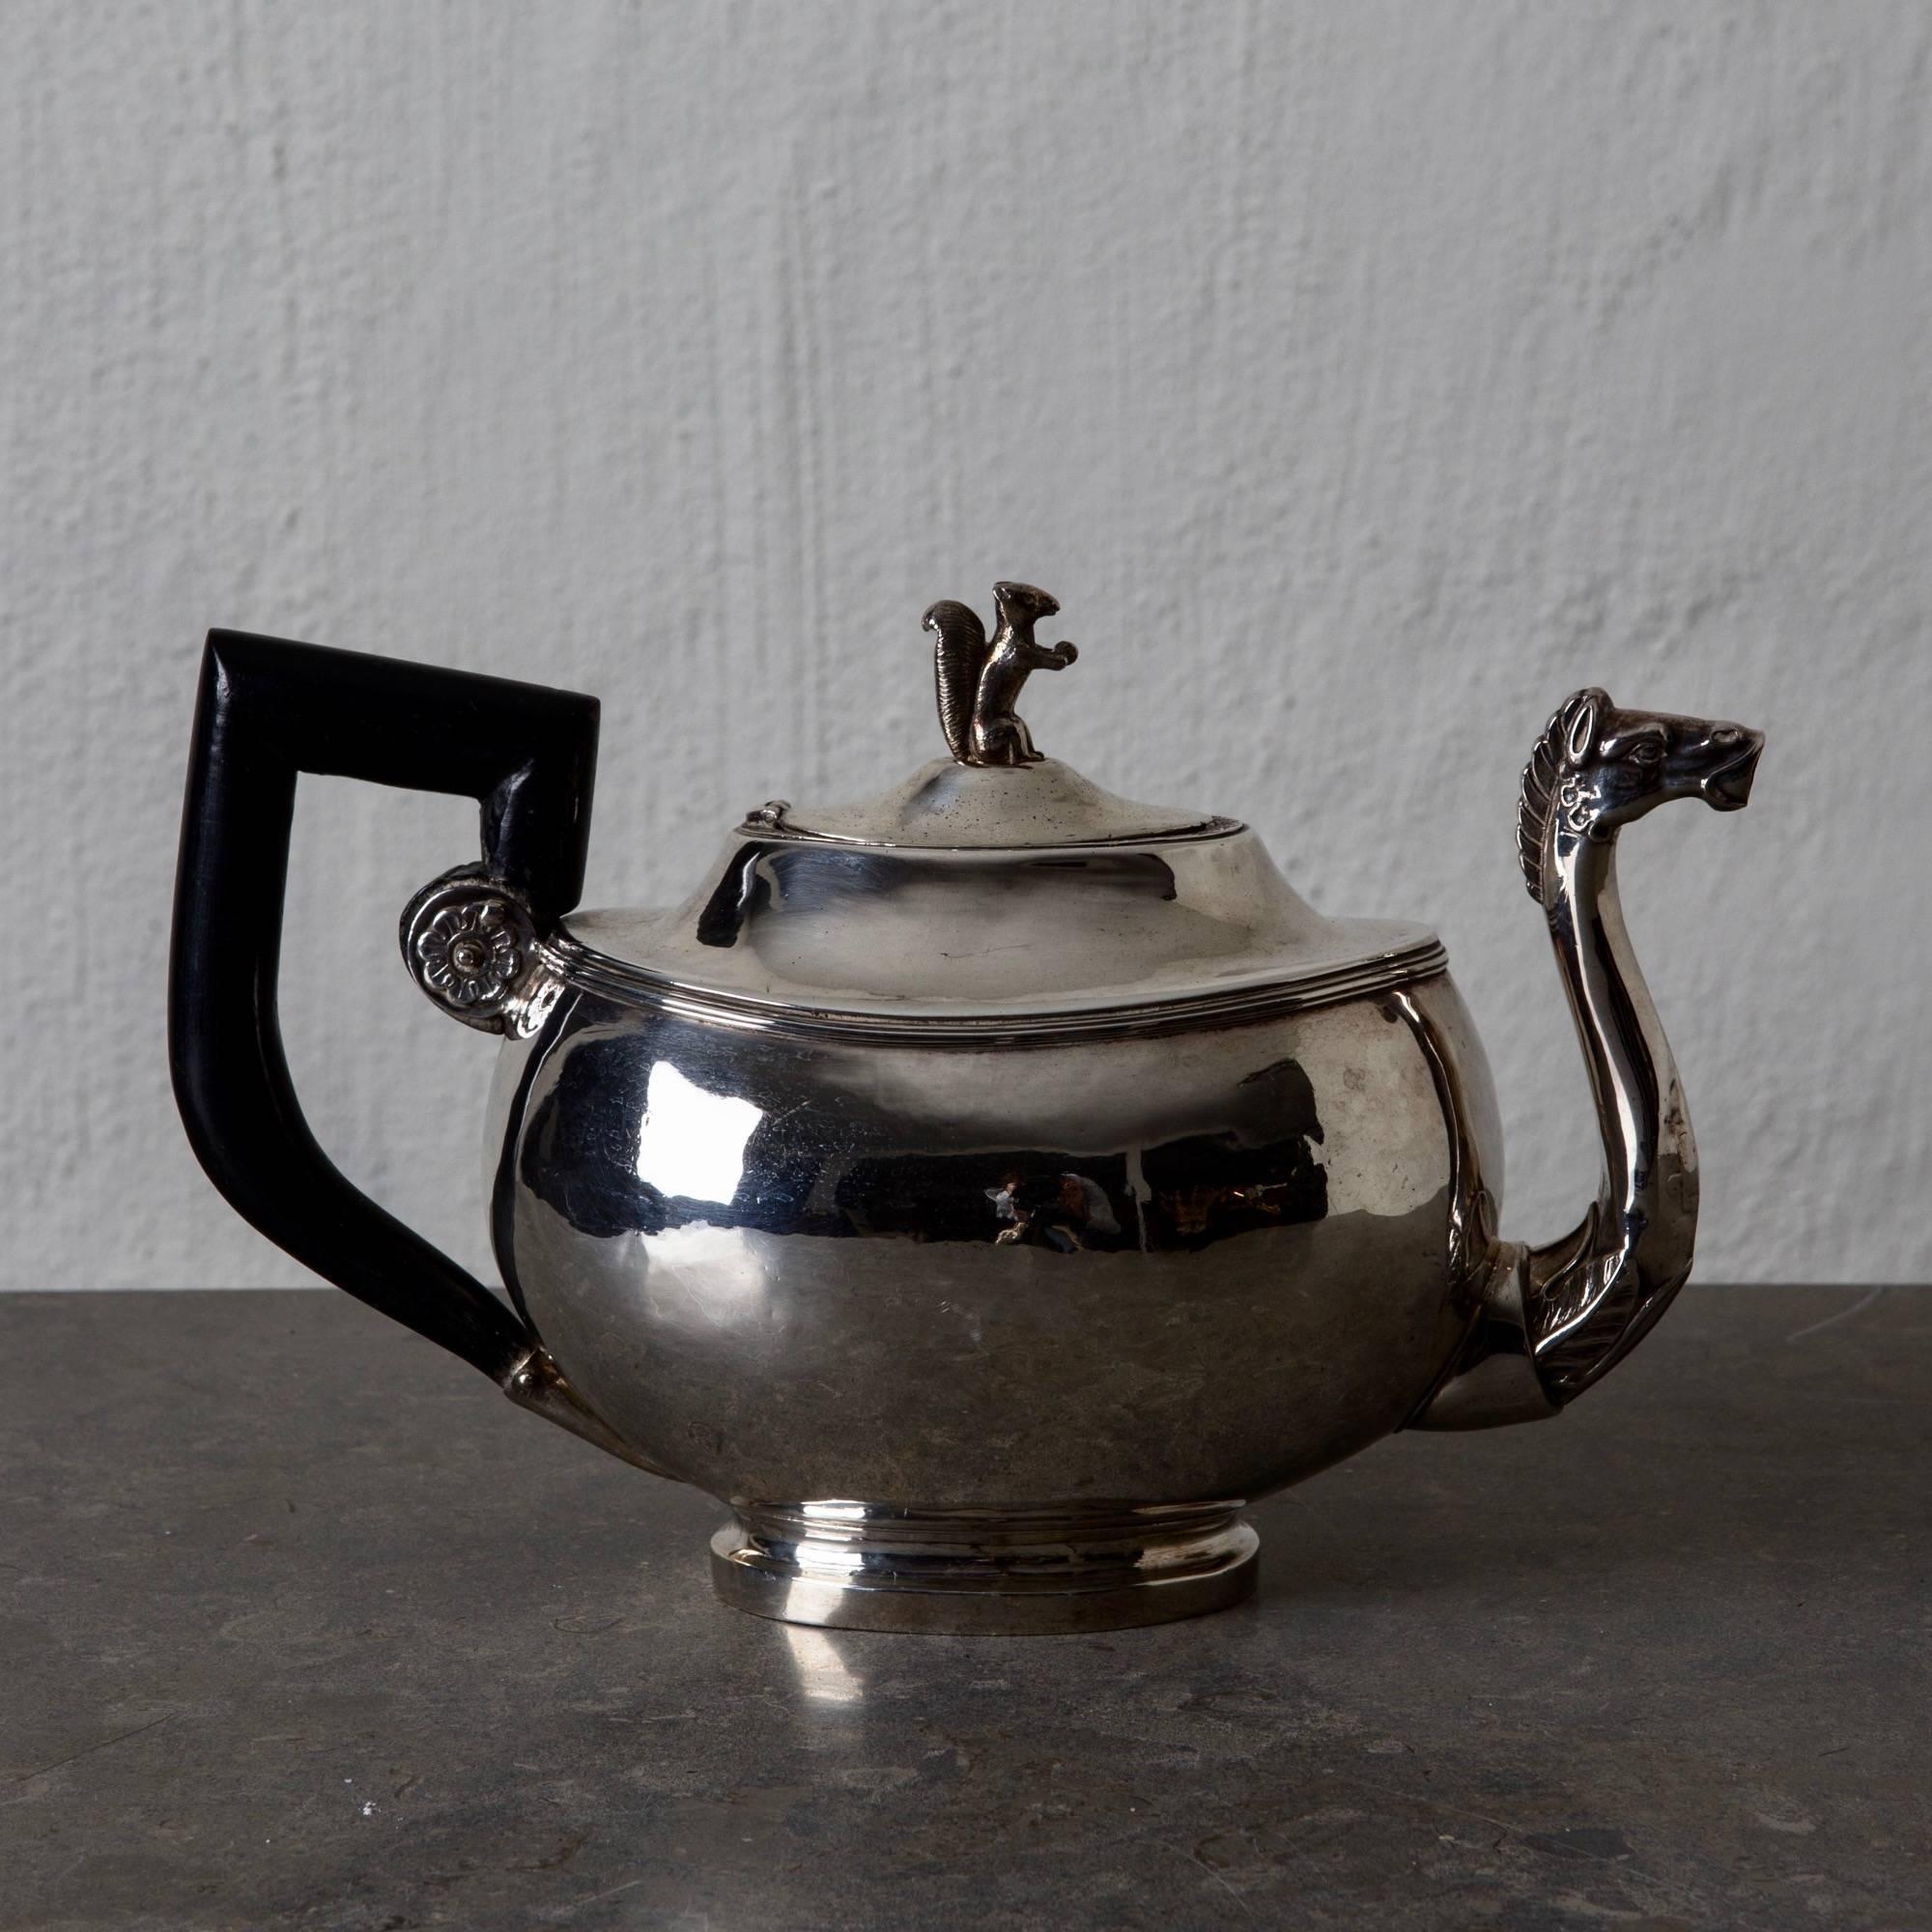 Coffee pot silver European 19th century blackened handle Austria. An exquisite example of a empire coffee pot made during the 19th century in Austria. Oval shape with beautiful details like a horse head and a squirrel. Stamped.